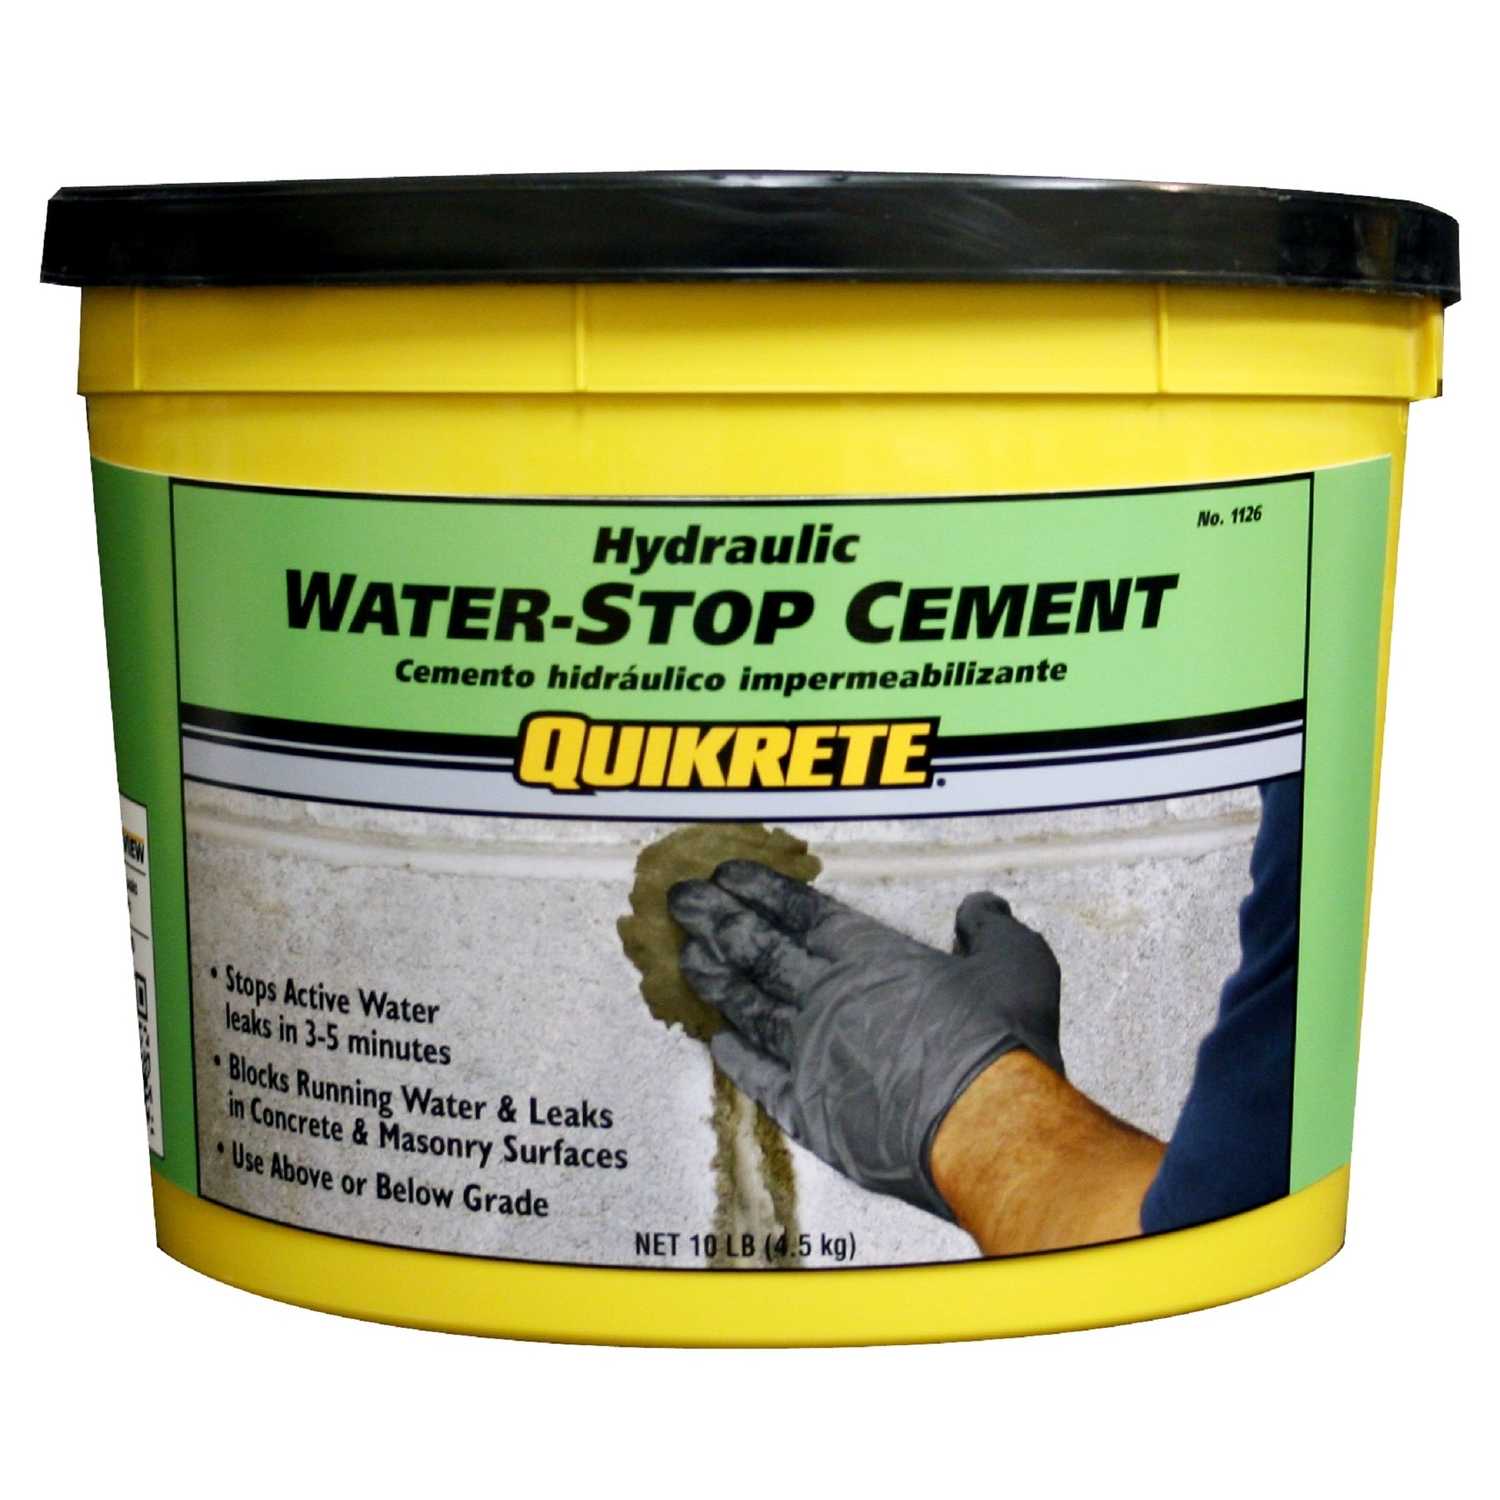 Quikrete Hydraulic Cement 10 lb. - Ace Hardware